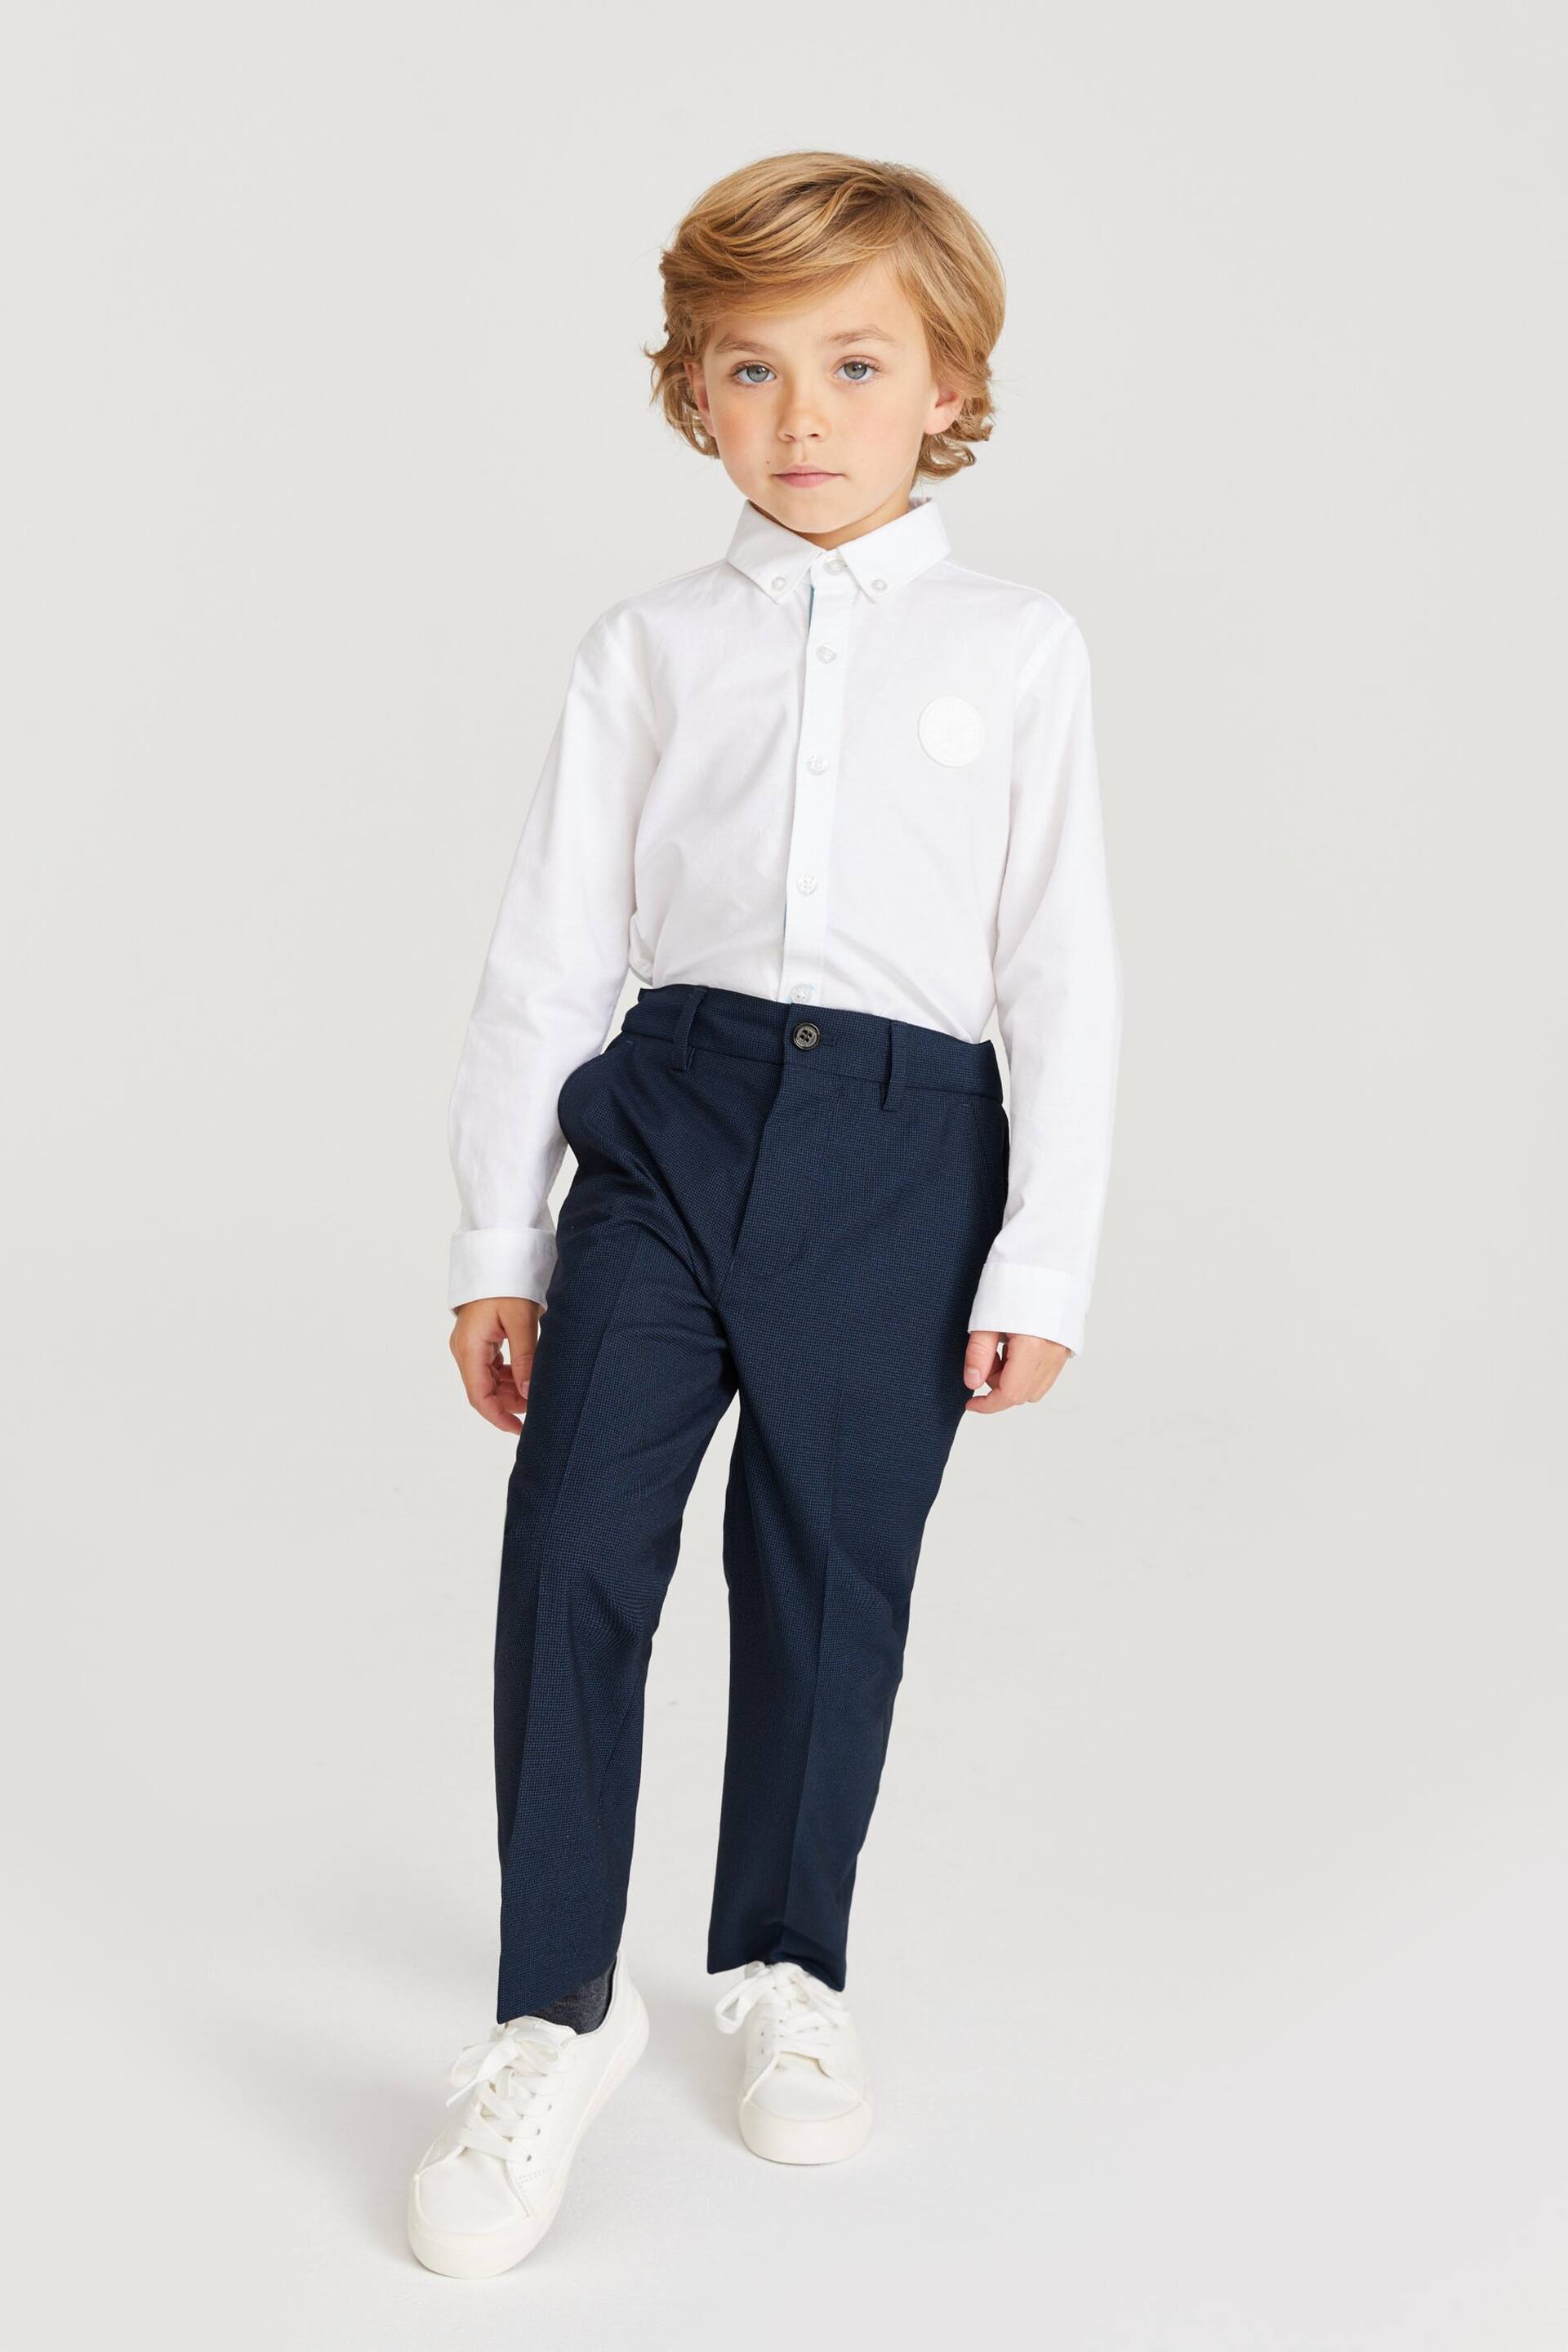 Baker by Ted Baker Suit Trousers - Image 2 of 5